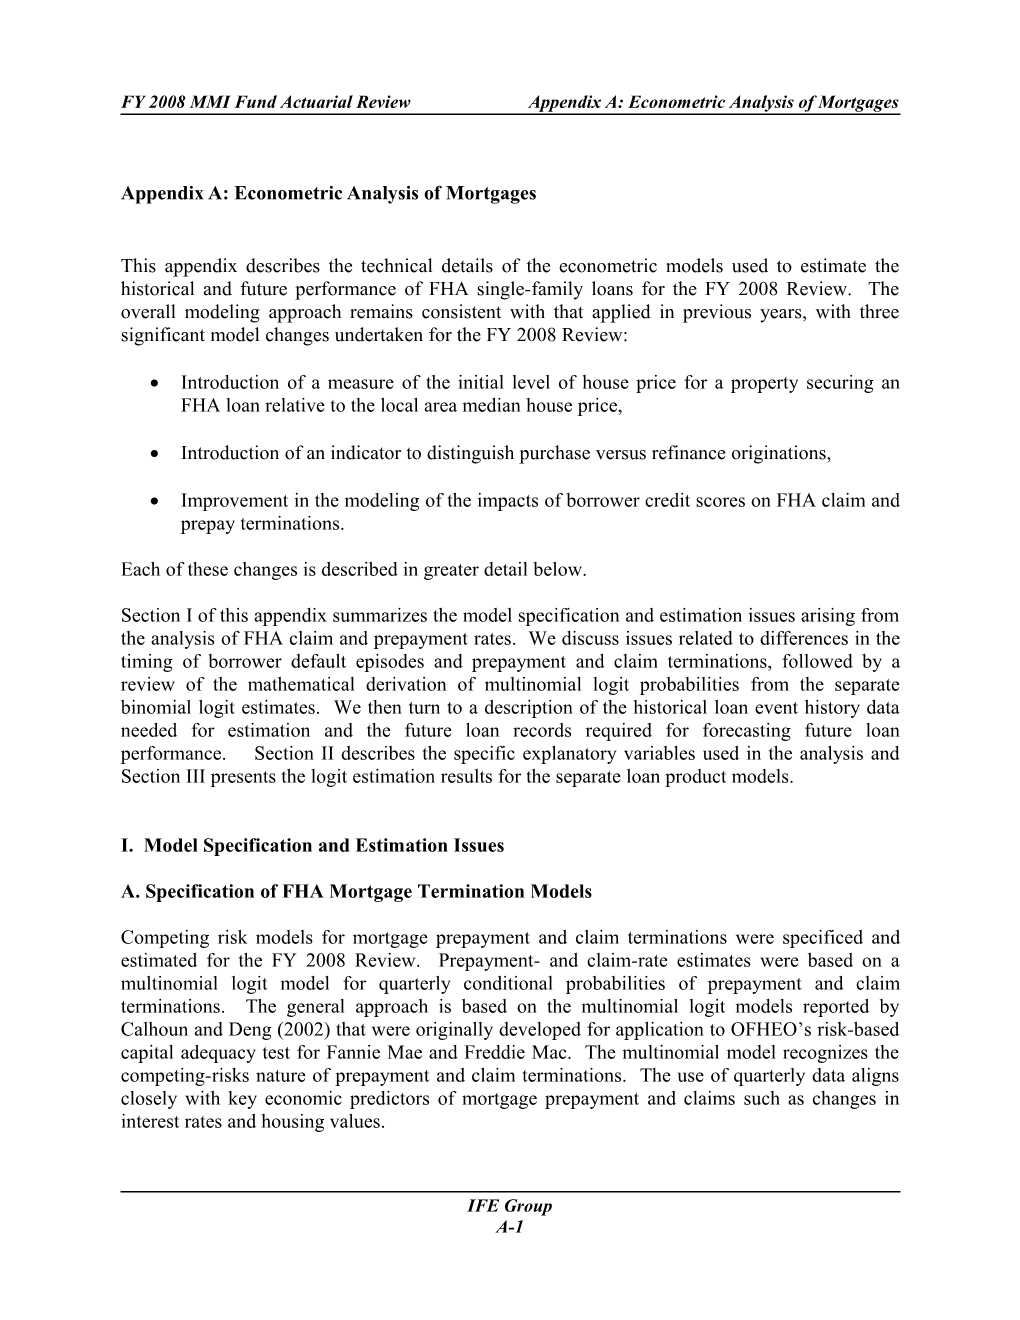 FY 2008 MMI Fund Actuarial Review Appendix A: Econometric Analysis of Mortgages